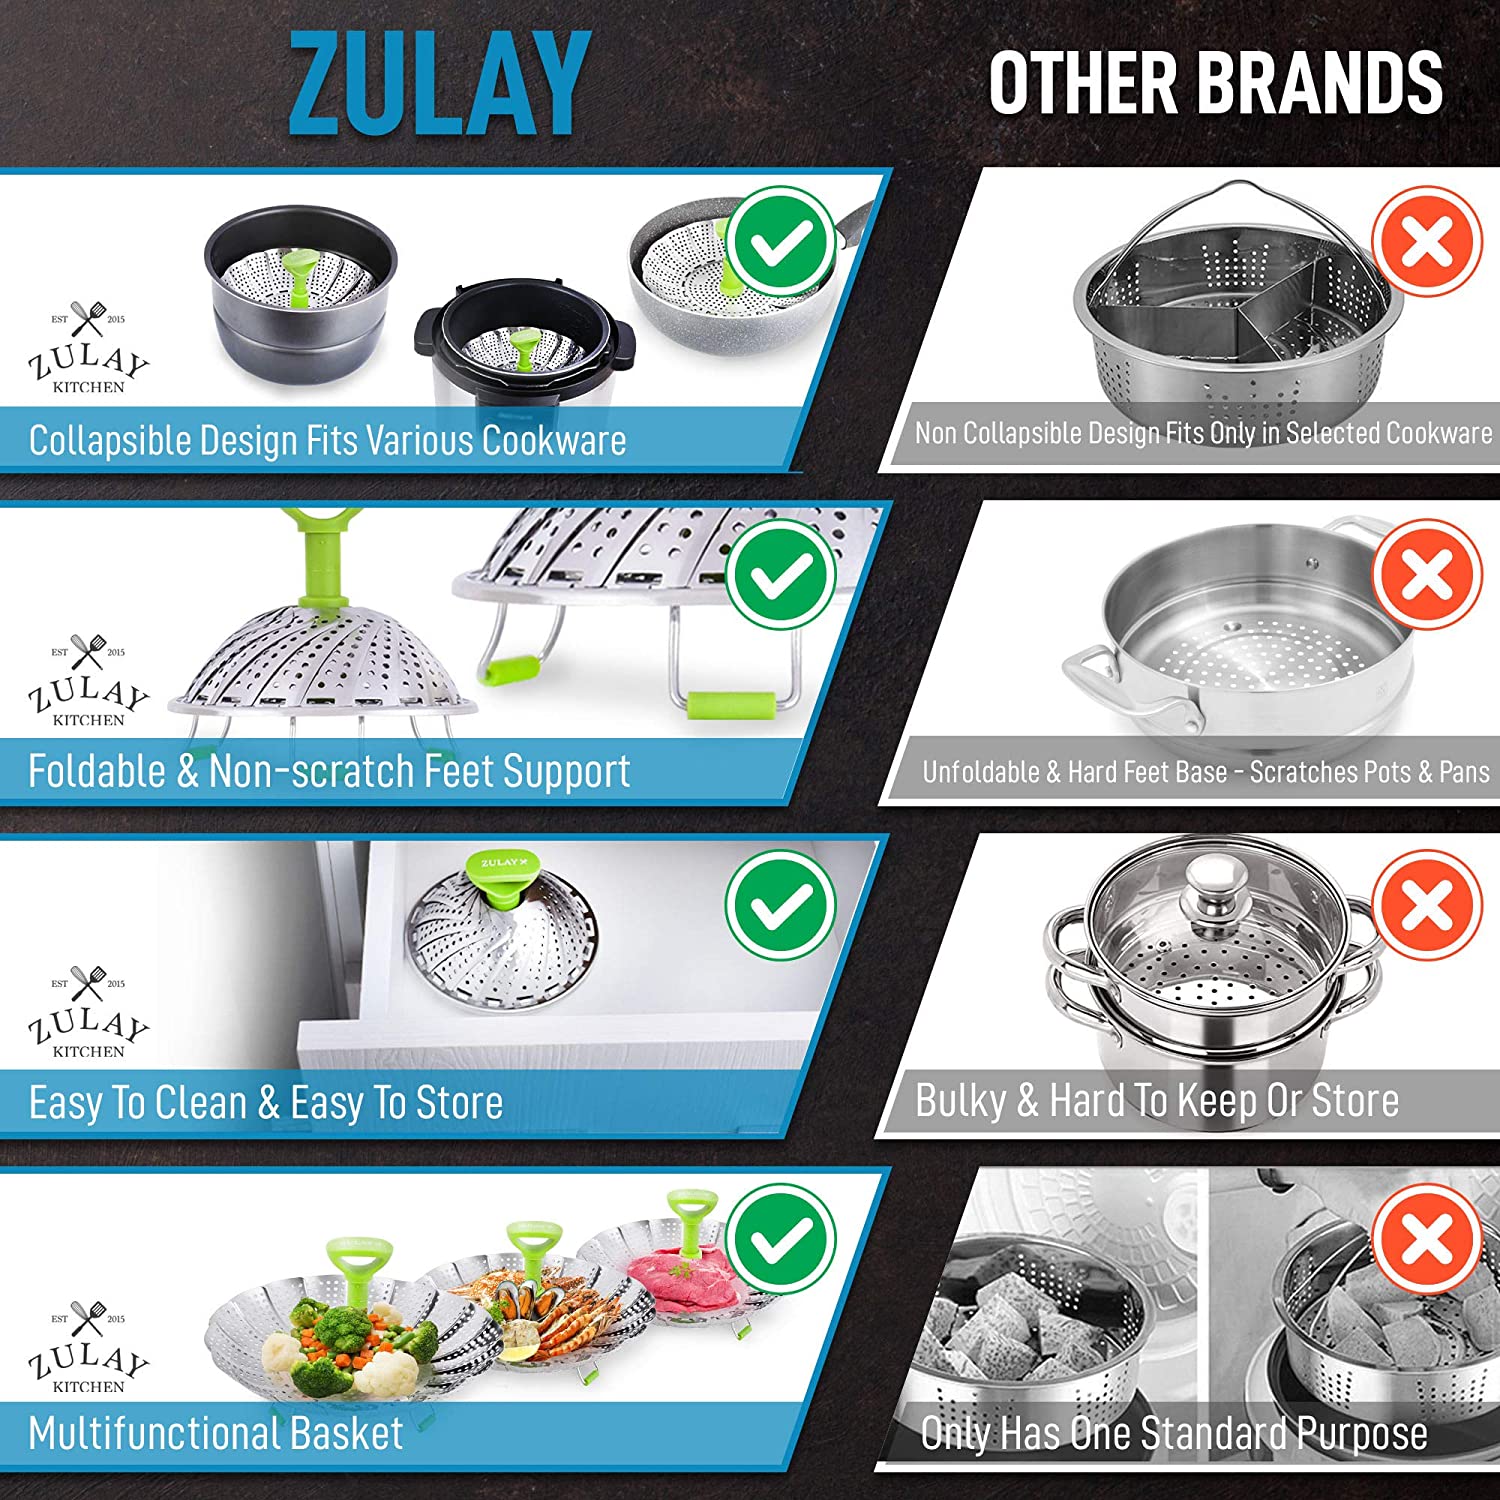 Zulay Kitchen Adjustable Vegetable Steamer Baskets For Cooking - Green